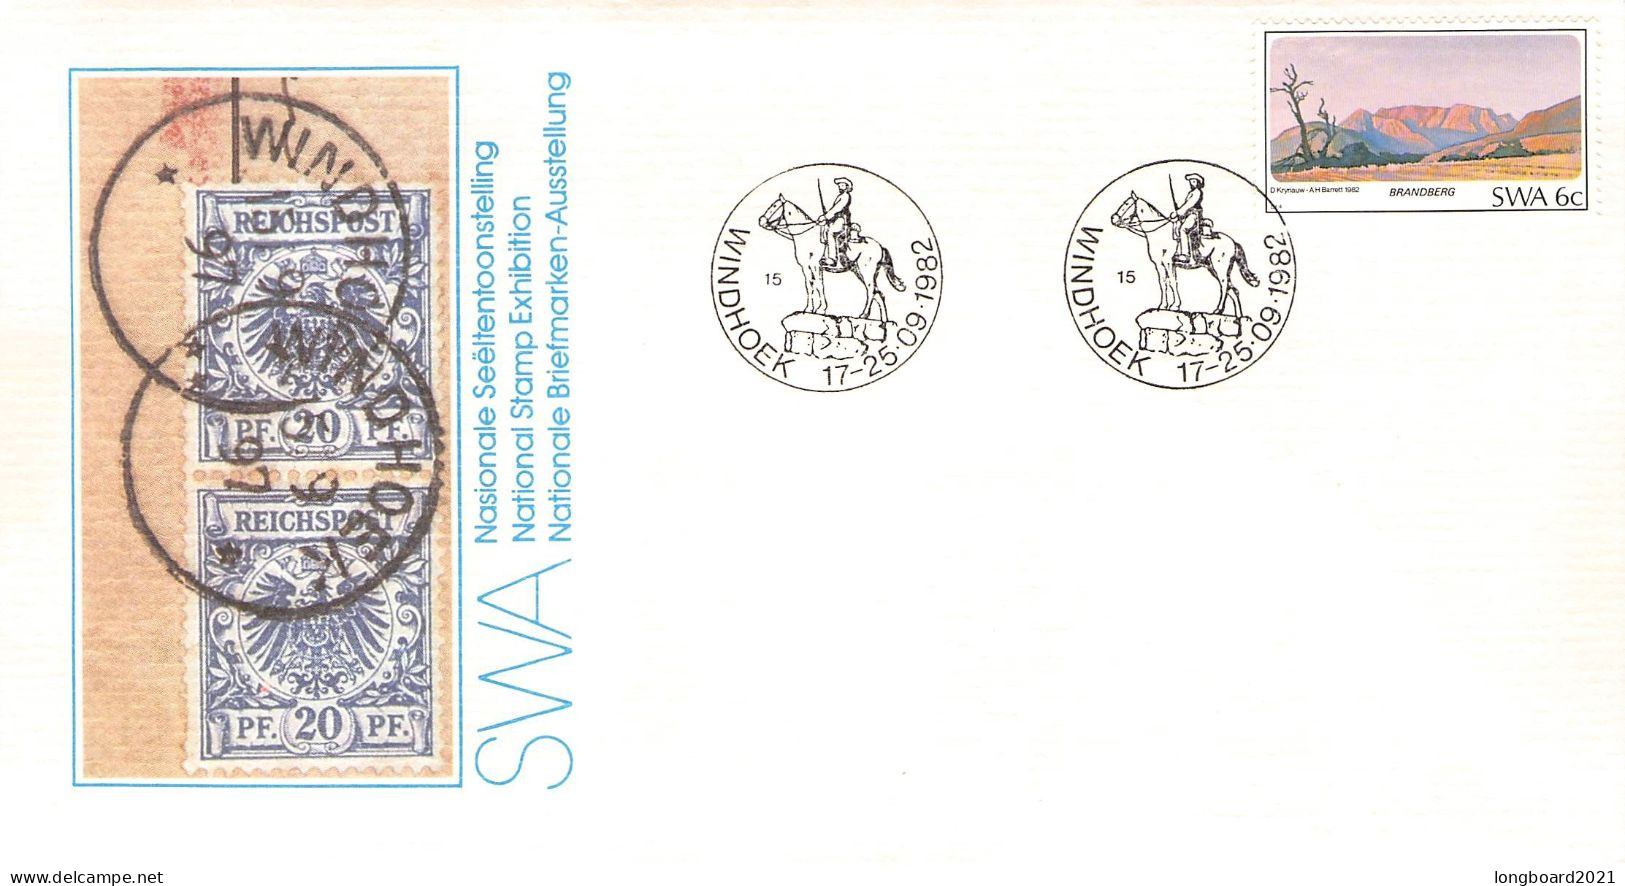 SOUTH WEST AFRICA - 1982 NATIONAL STAMP EXHIBITION  /*27 - África Del Sudoeste (1923-1990)